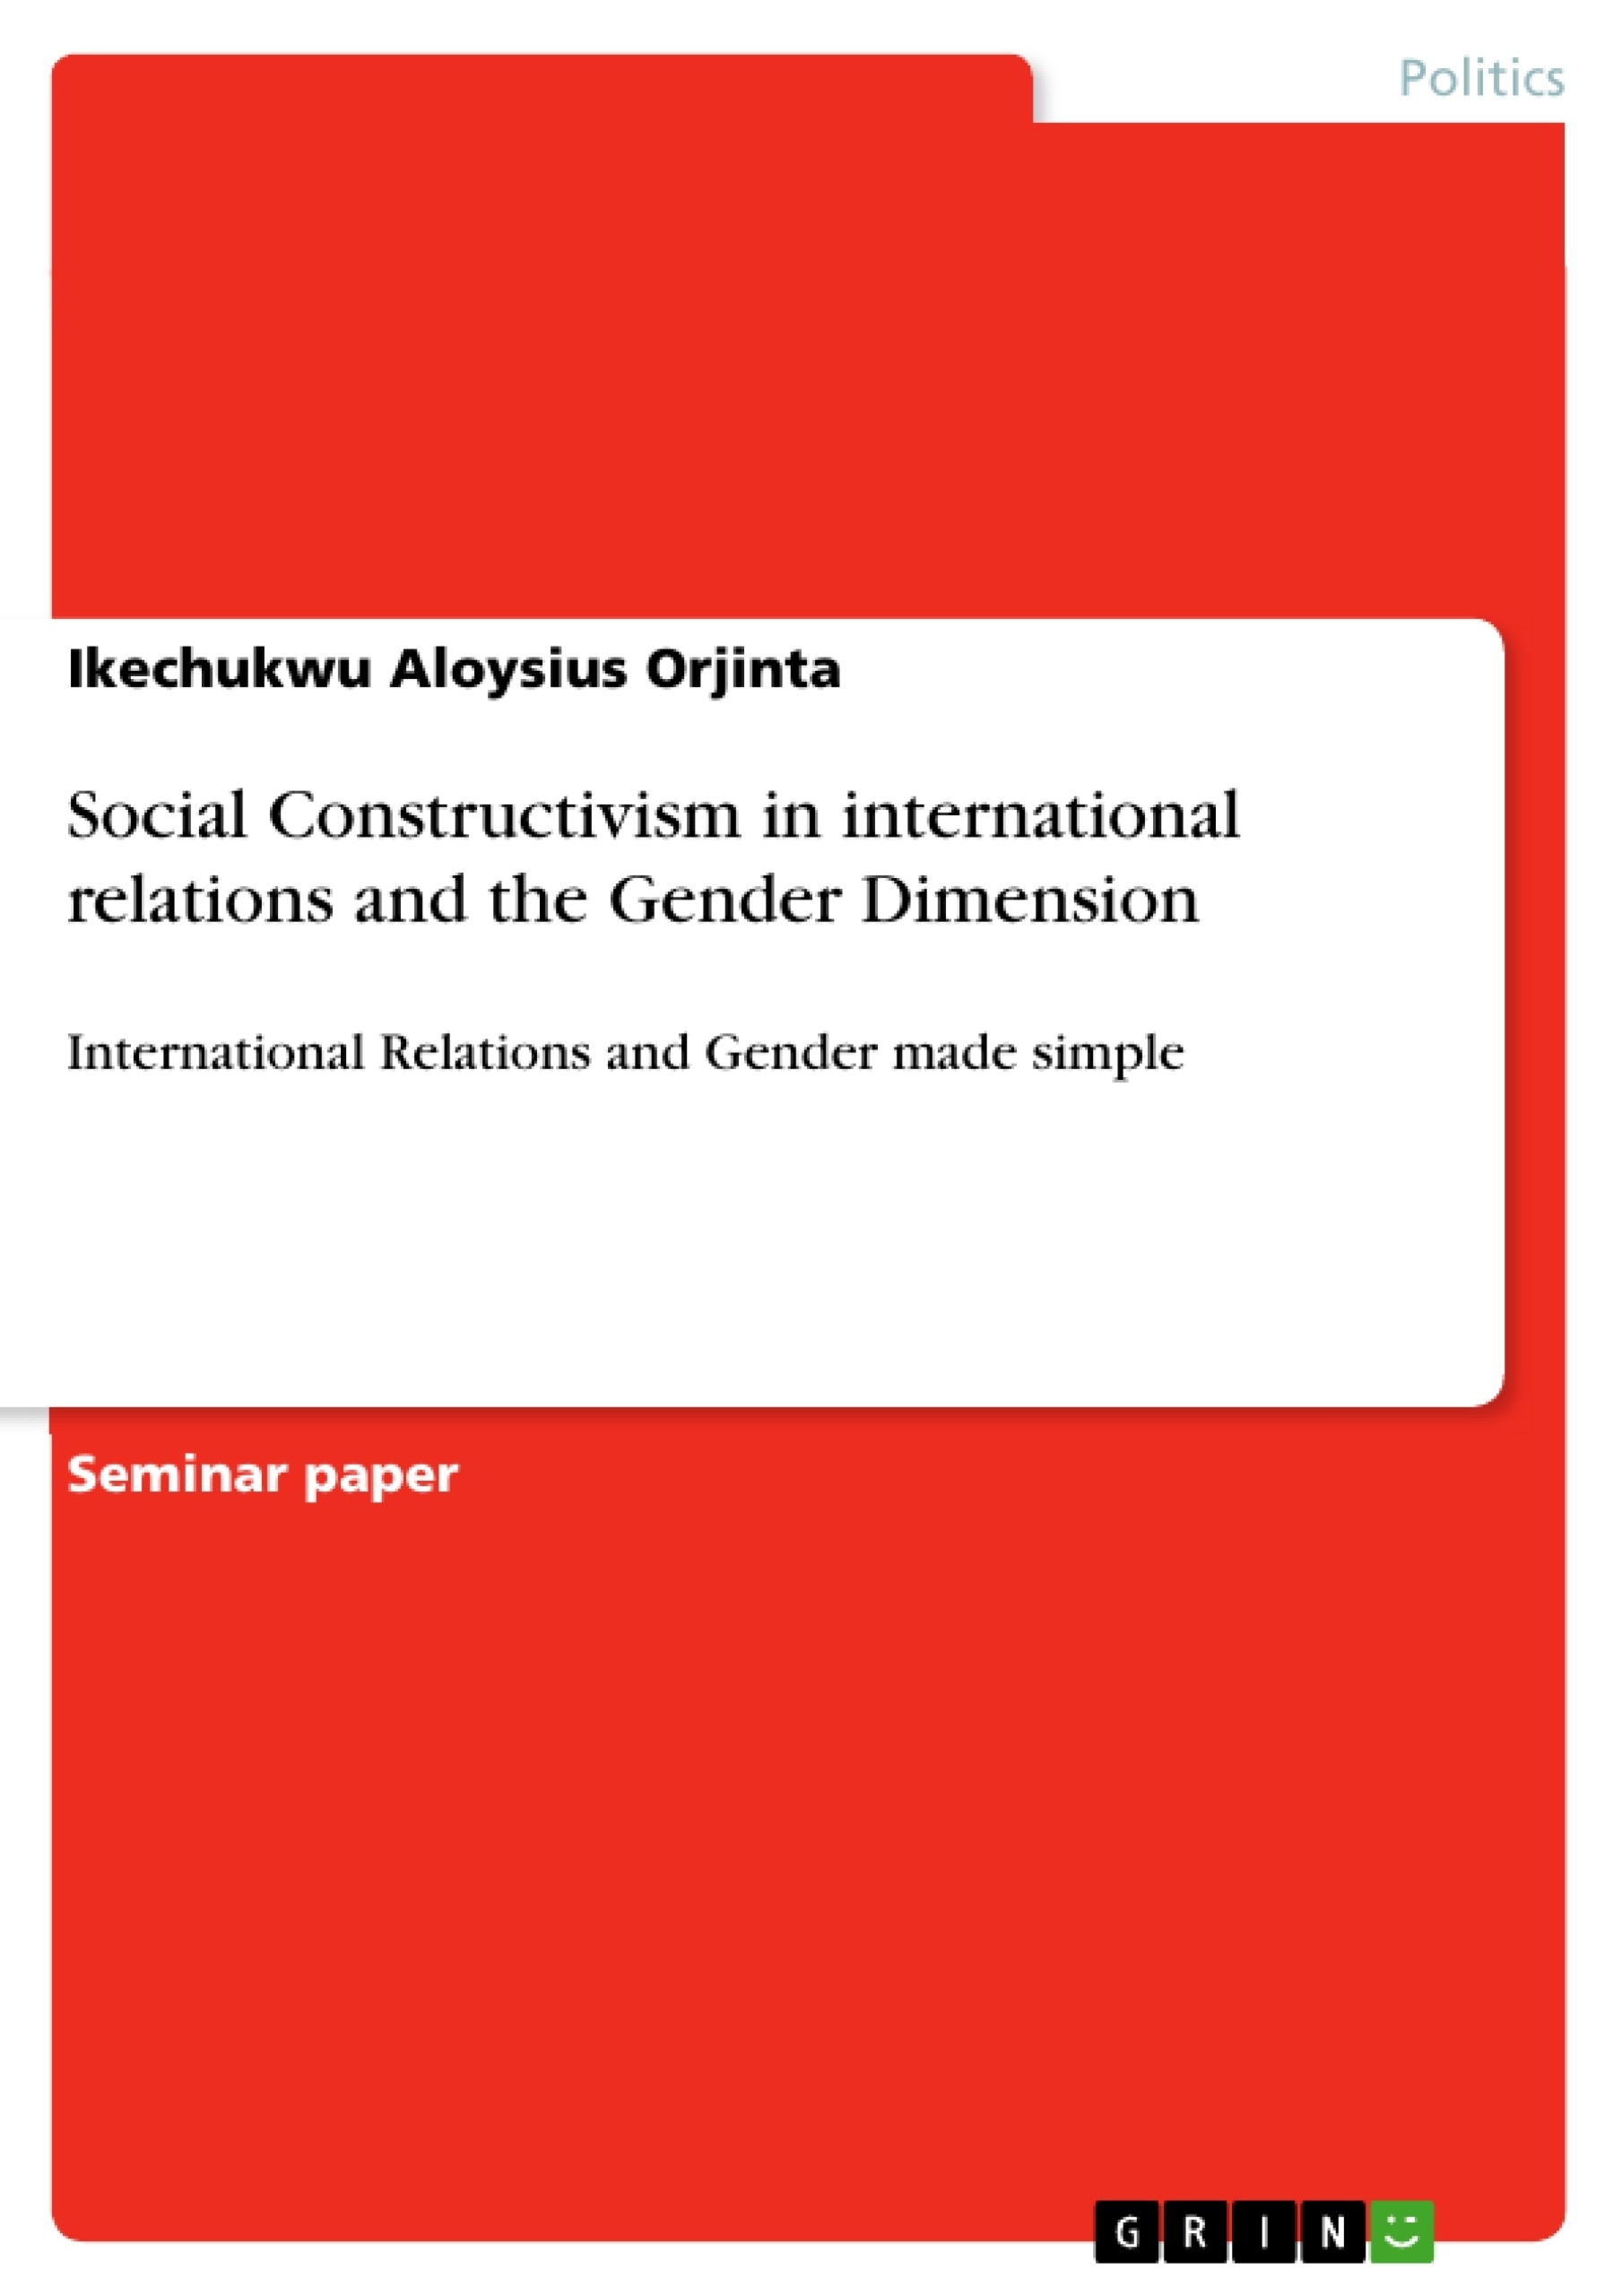 Title: Social Constructivism in international relations and the Gender Dimension